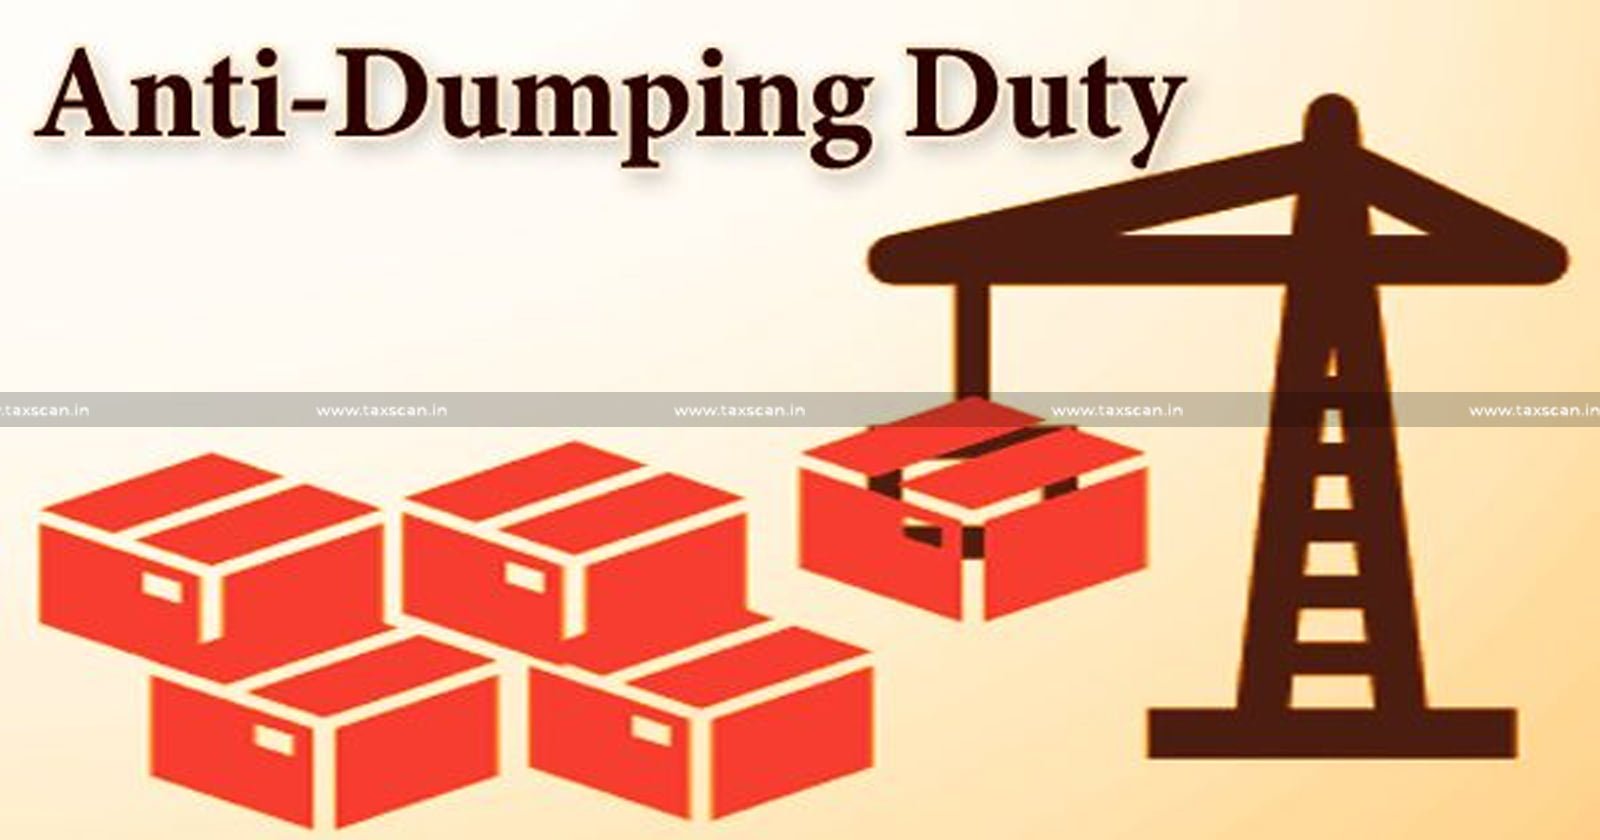 Denial of Refund - Anti-Dumping Duty for Past Clearances Without Detecting Dumping Violates Article 265 of Indian Constitution - CESTAT Allows Appeal - TAXSCAN